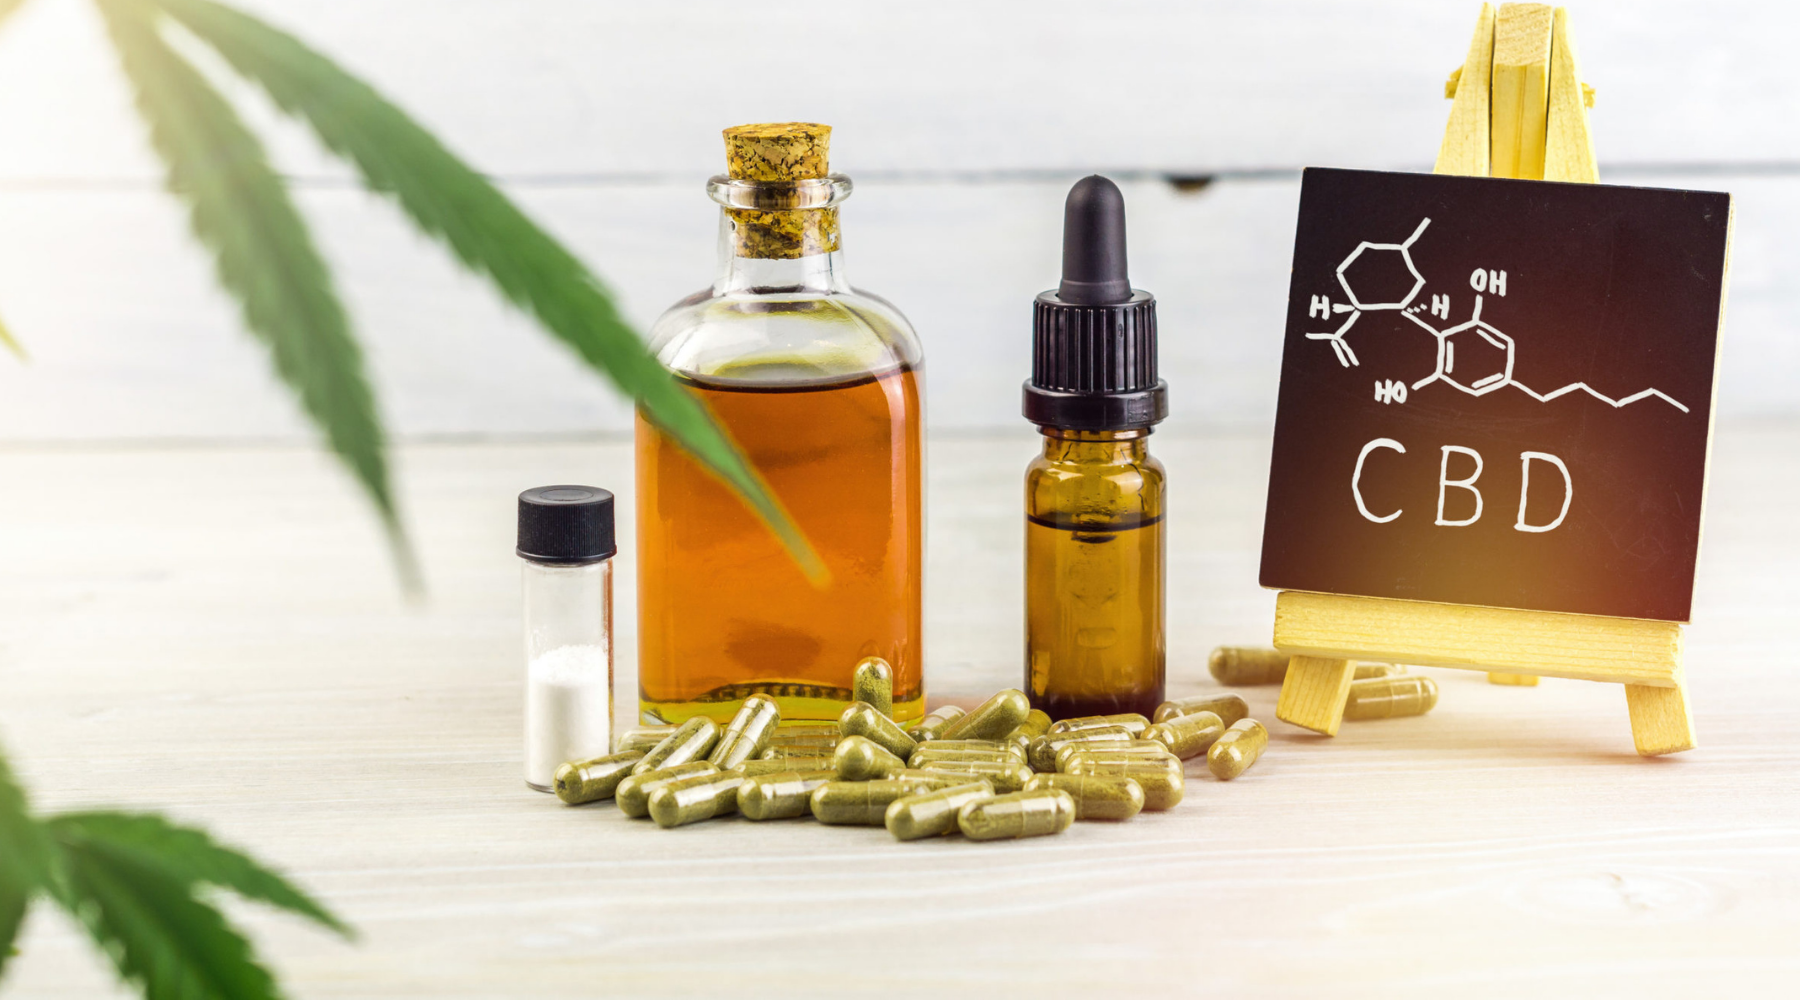 Where to buy CBD Oil in South Ayrshire, UK